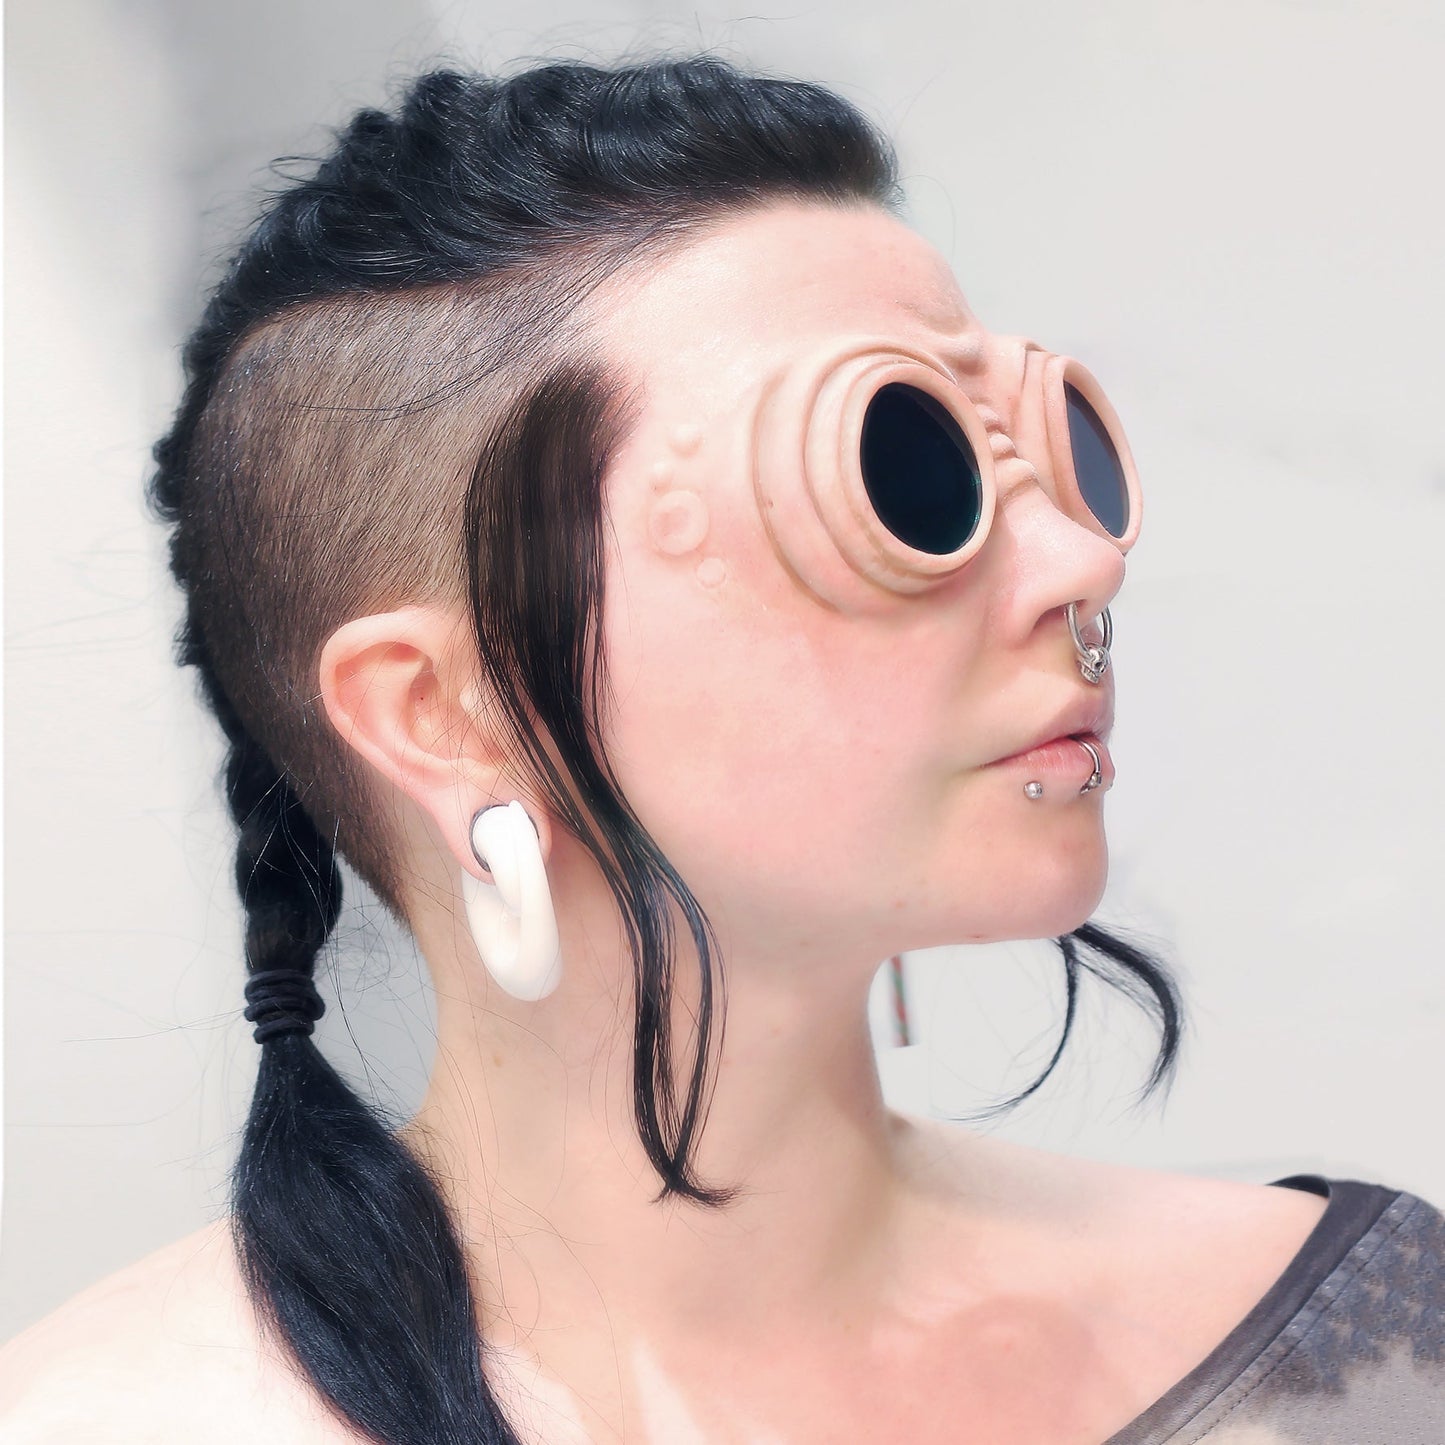 Woman with a black braid wearing goggle prosthetics